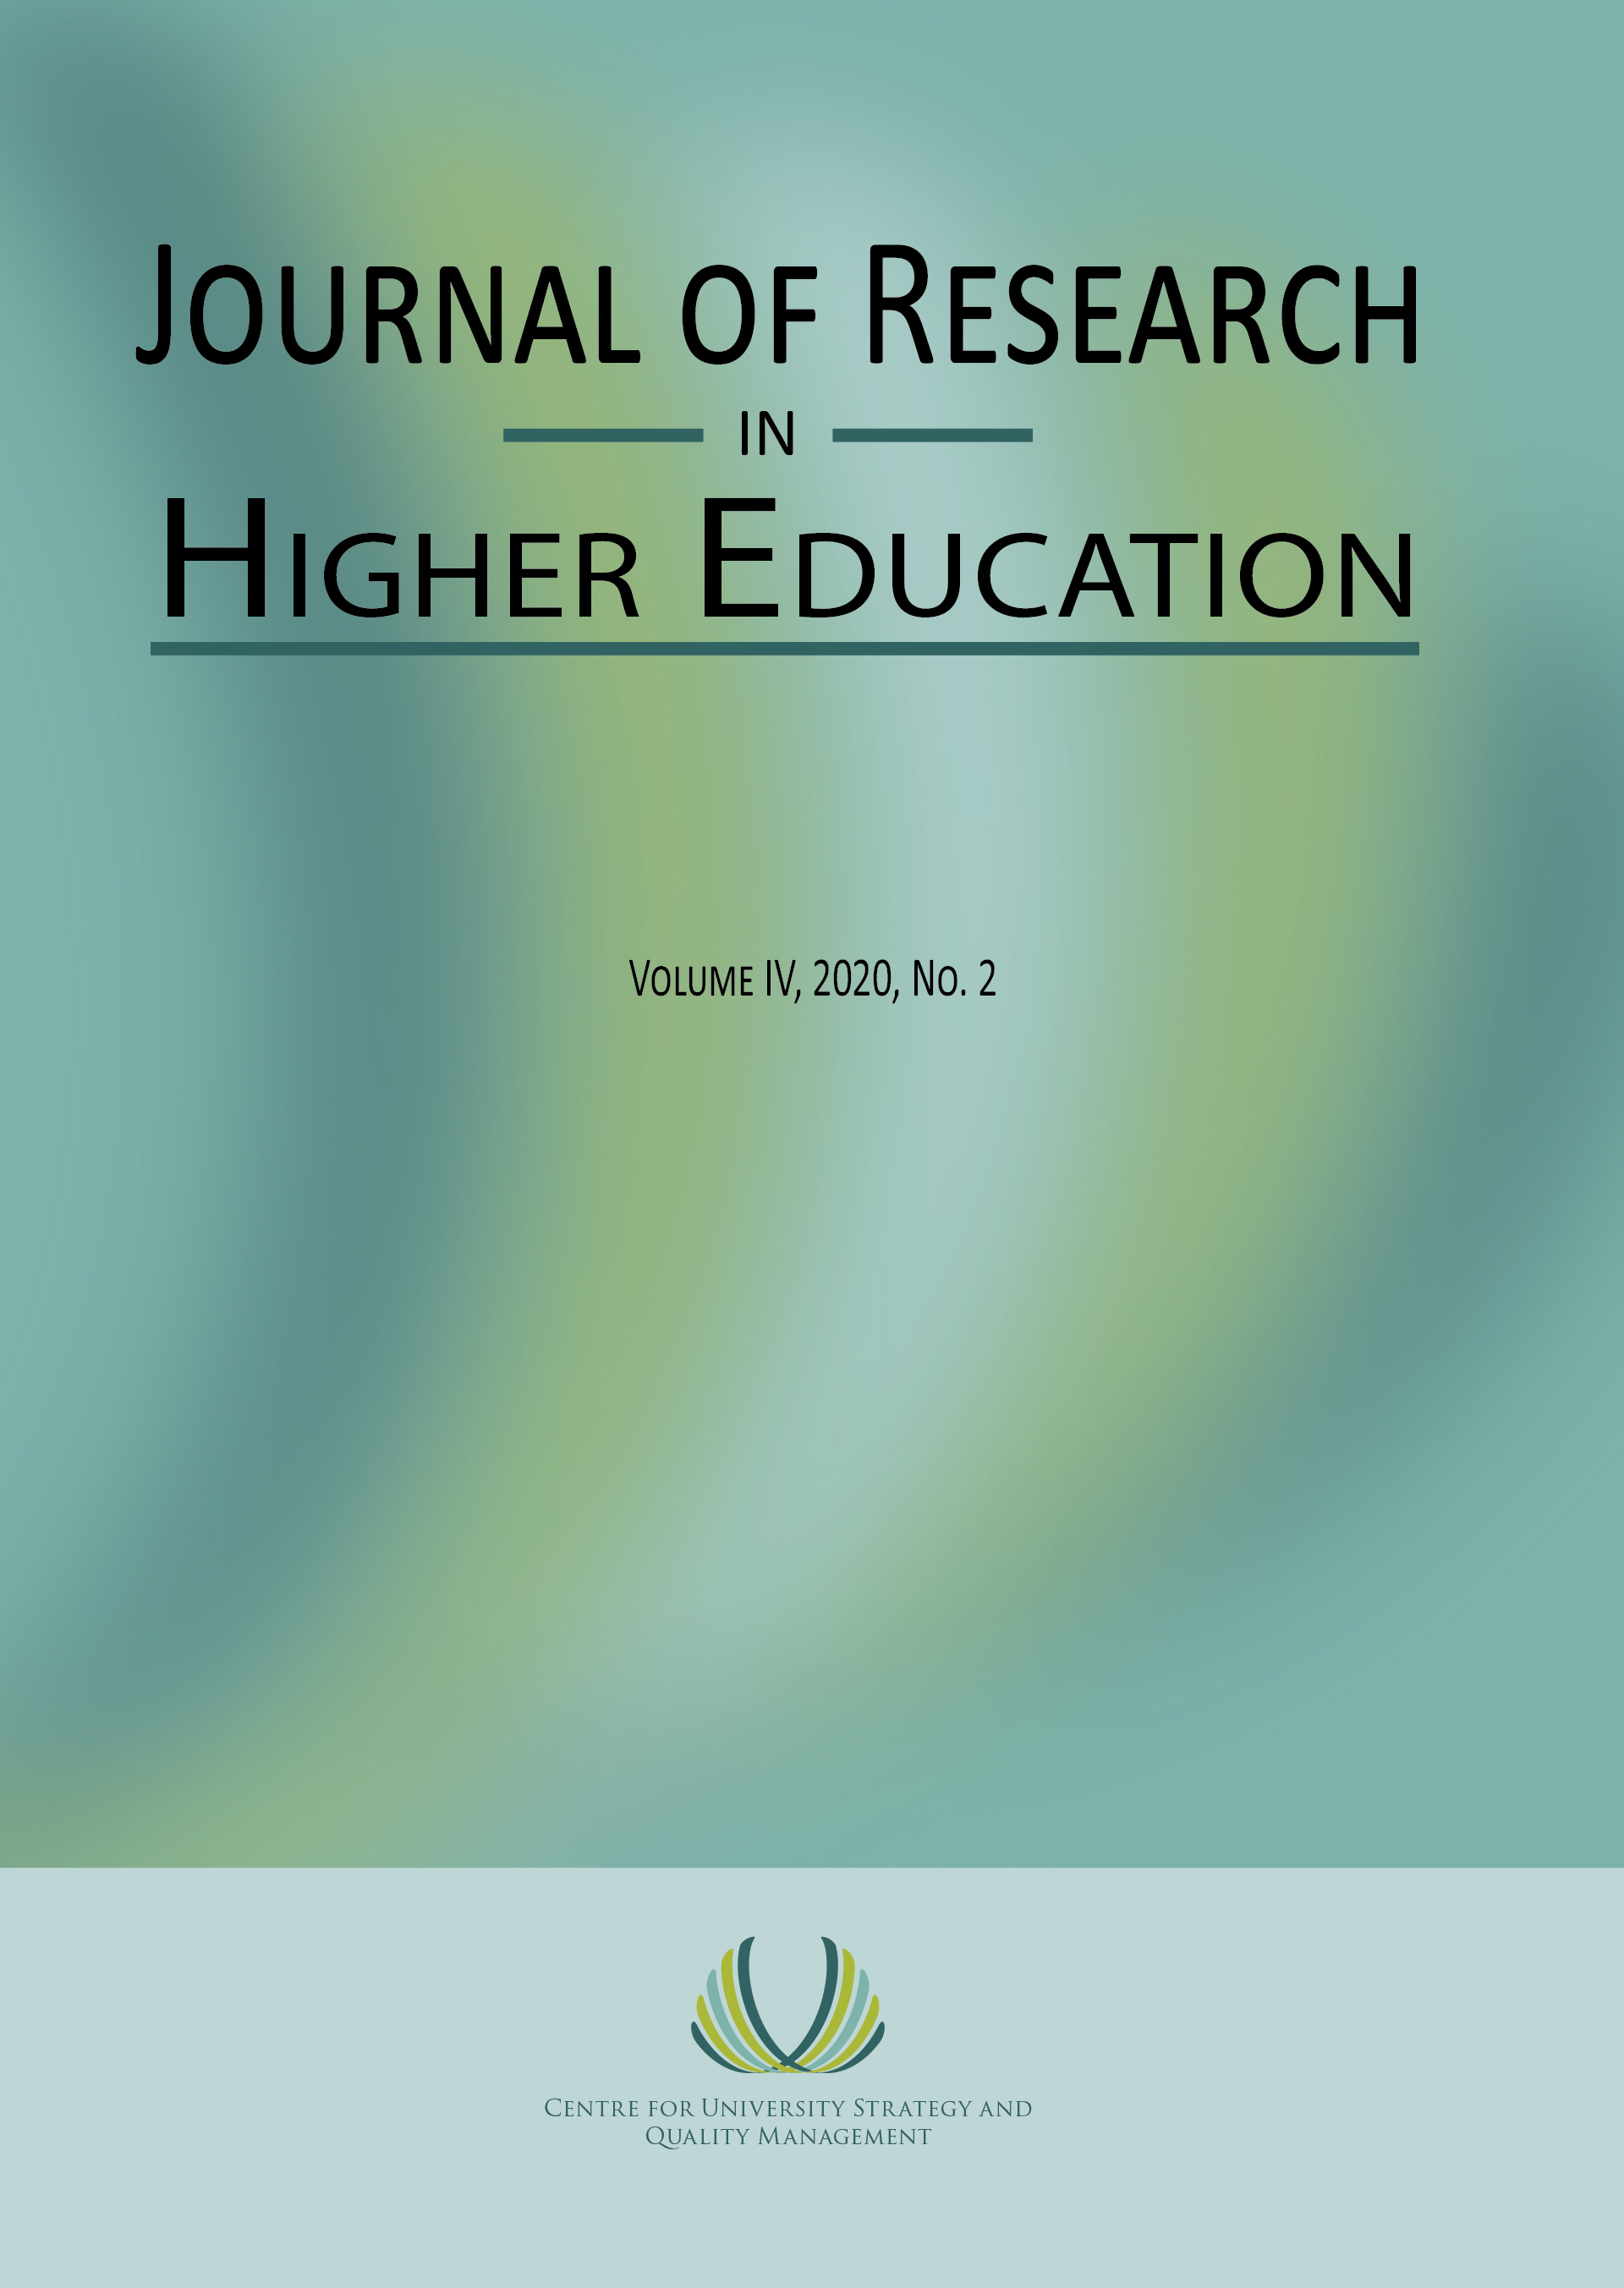 Integrating Academic Skills and Employability - Revisiting the Learning Journal